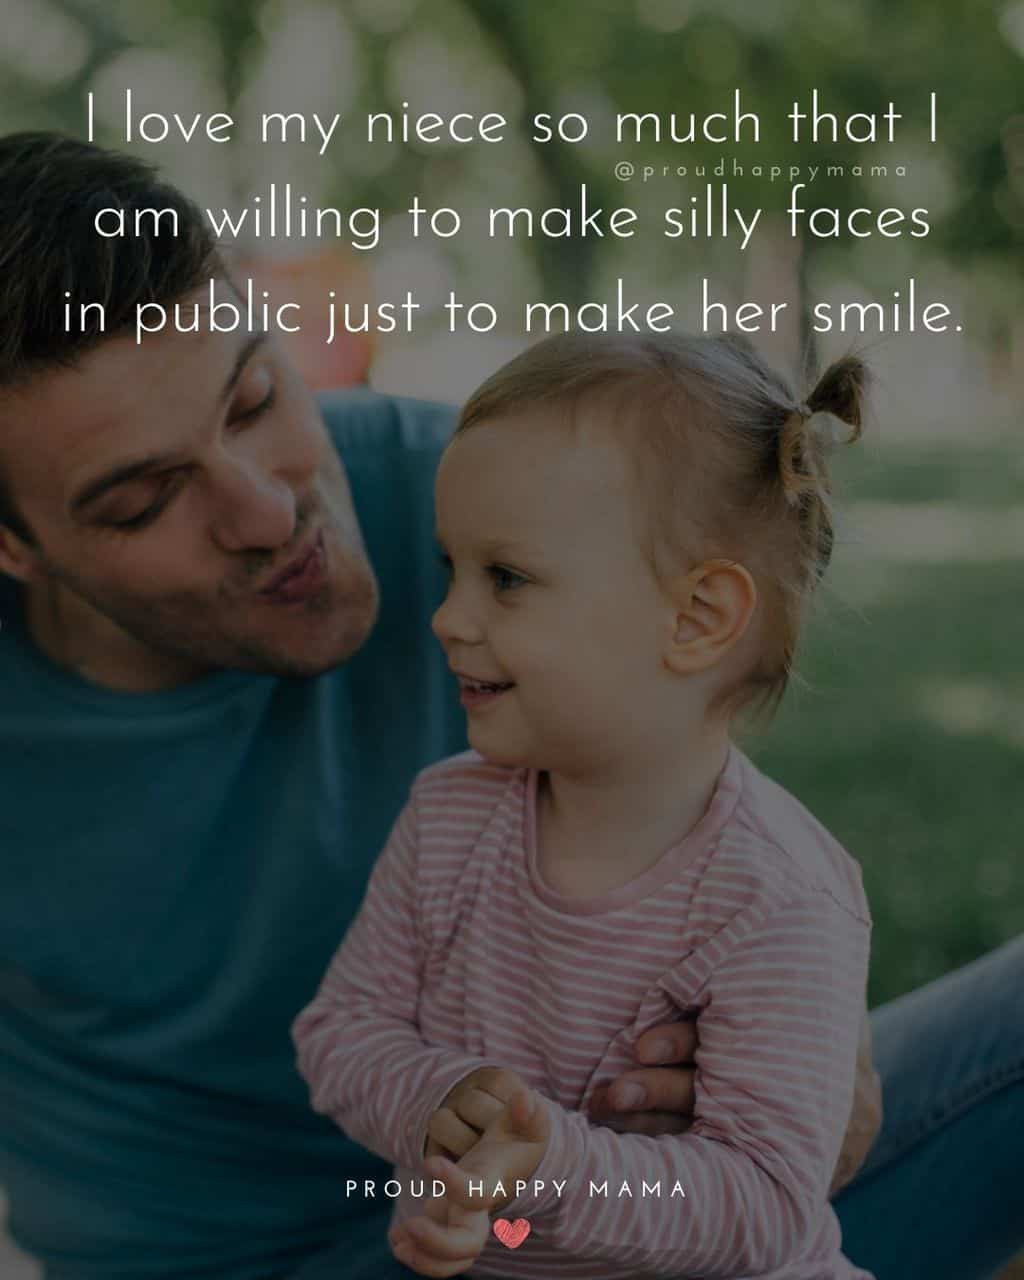 Niece Quotes - I love my niece so much that I am willing to make silly faces in public just to make her smile.